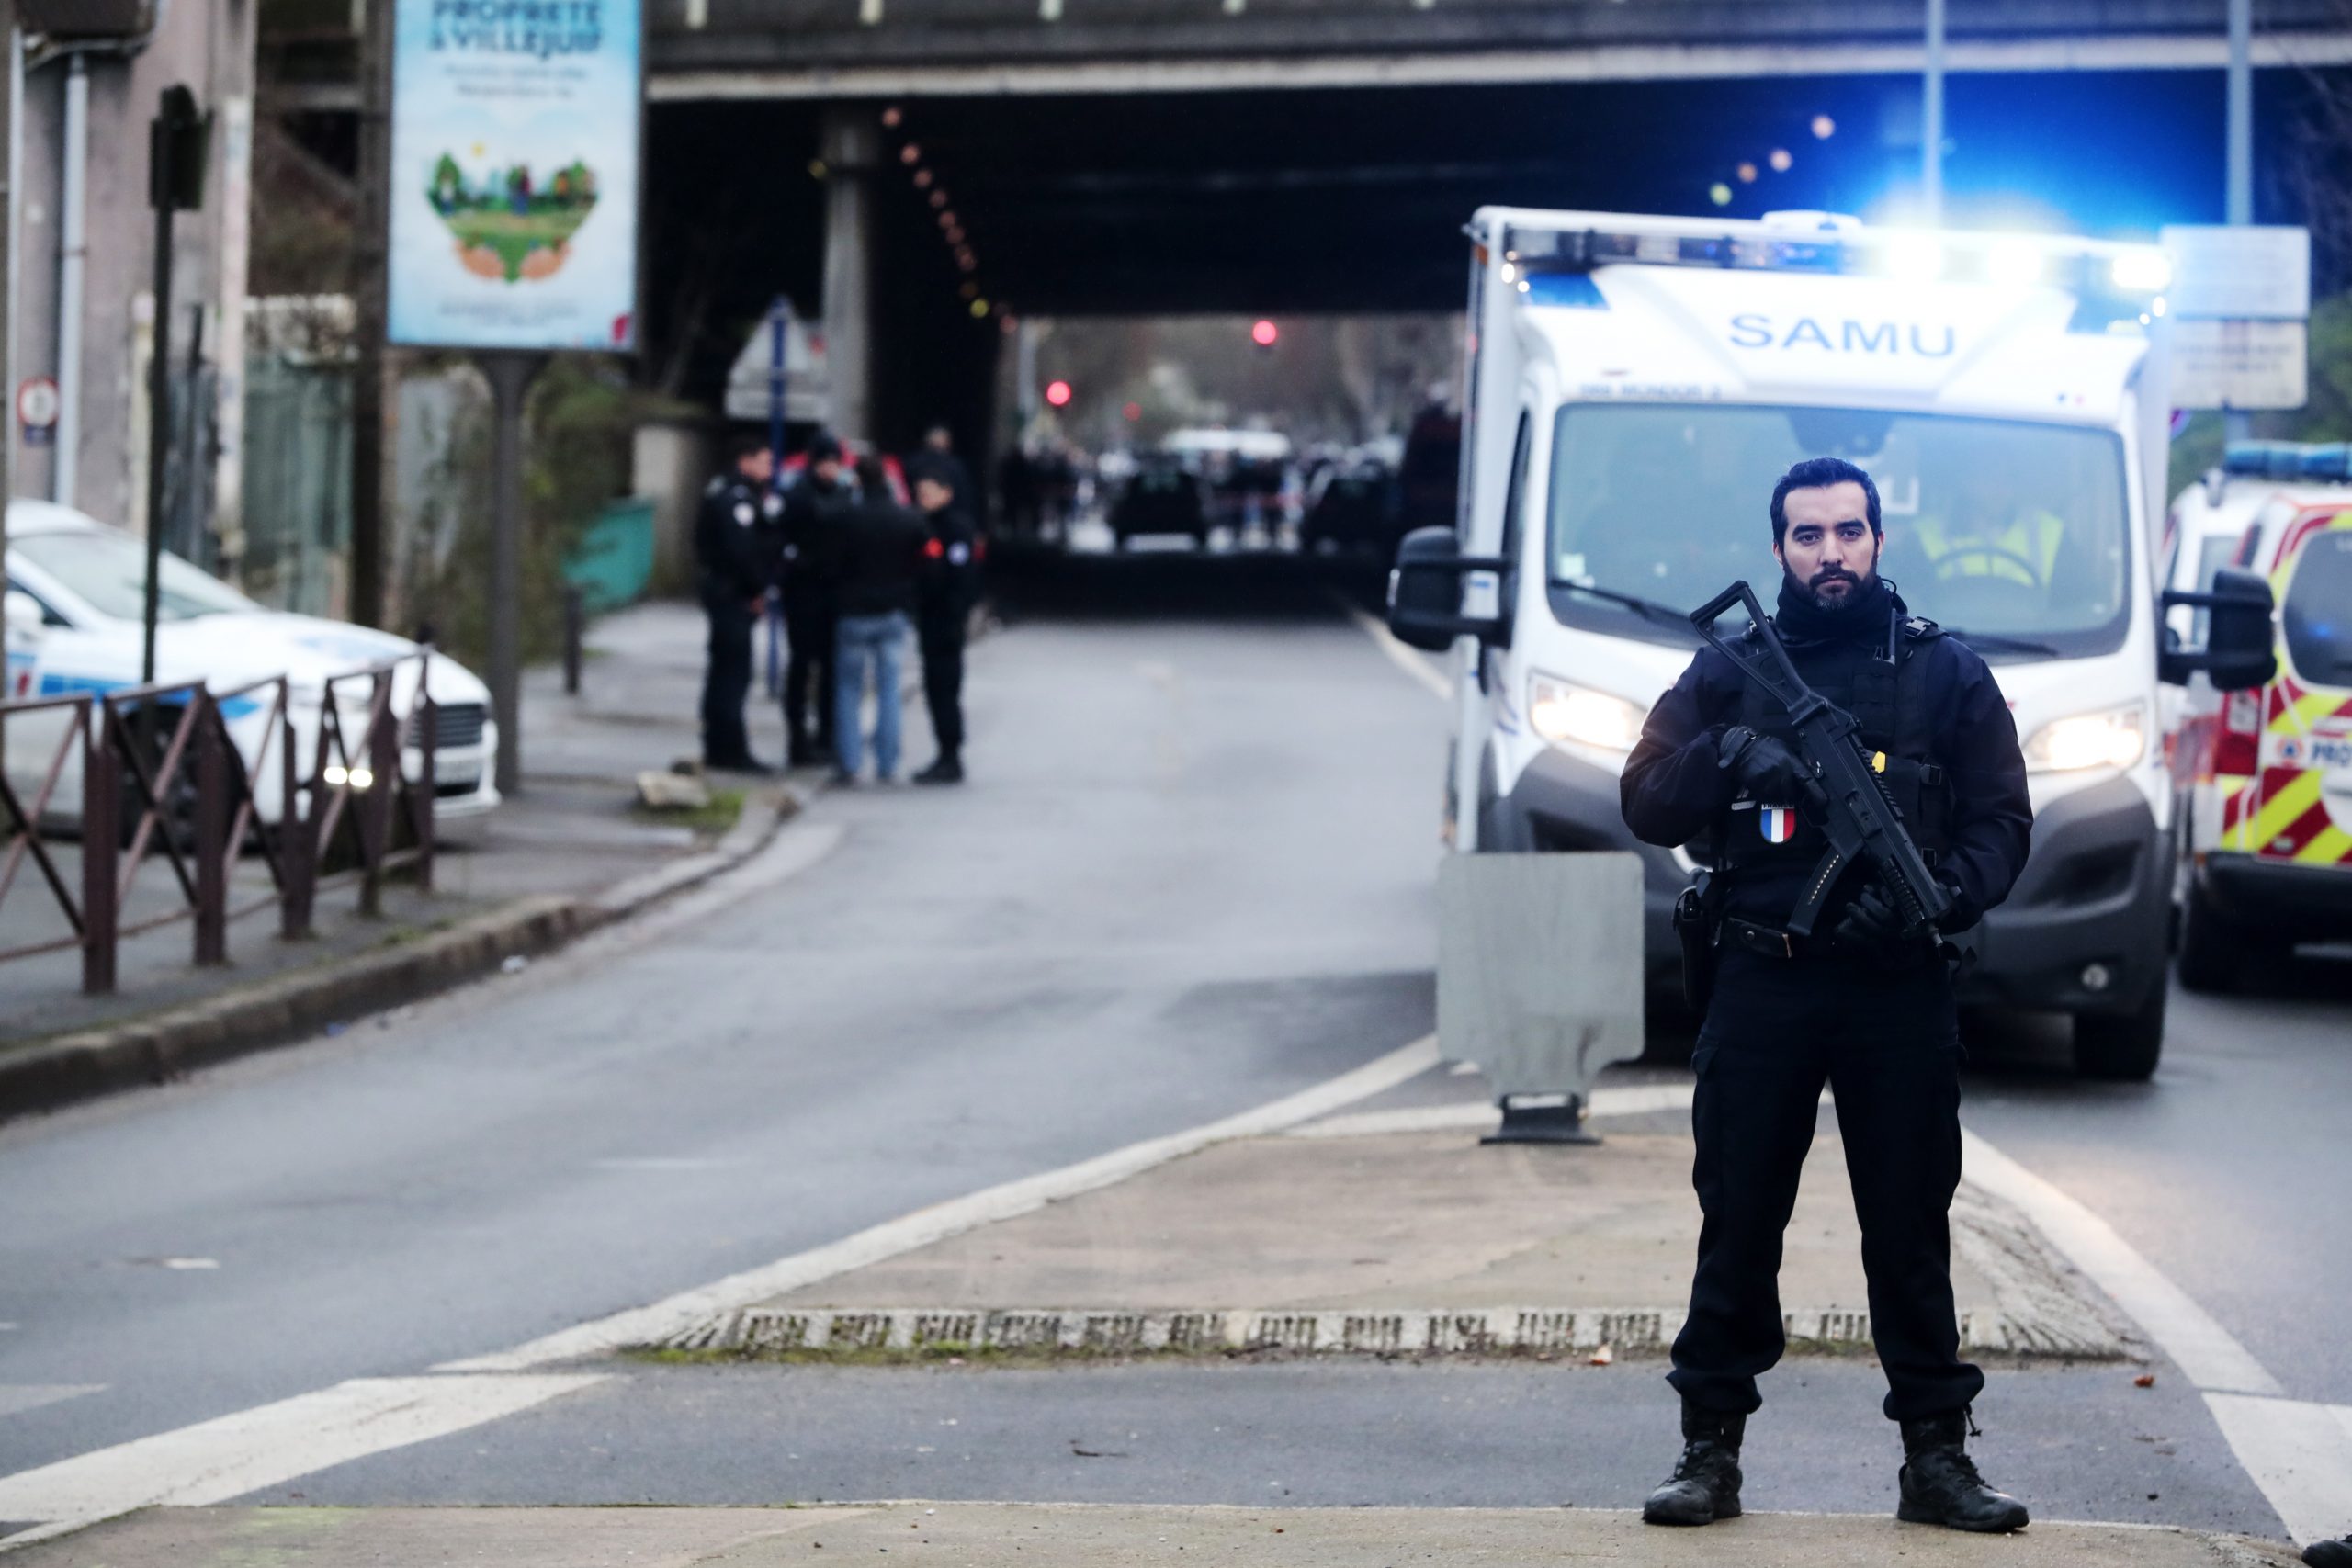 epa08100395 French police and rescue team stand at a security perimeter at the Hautes-Bruyeres public park in Villejuif, near Paris, France, 03 January 2020, after a man stabbed several people. According to recent reports, one person died, two are seriously injured. Police killed the assailant.  EPA/CHRISTOPHE PETIT TESSON